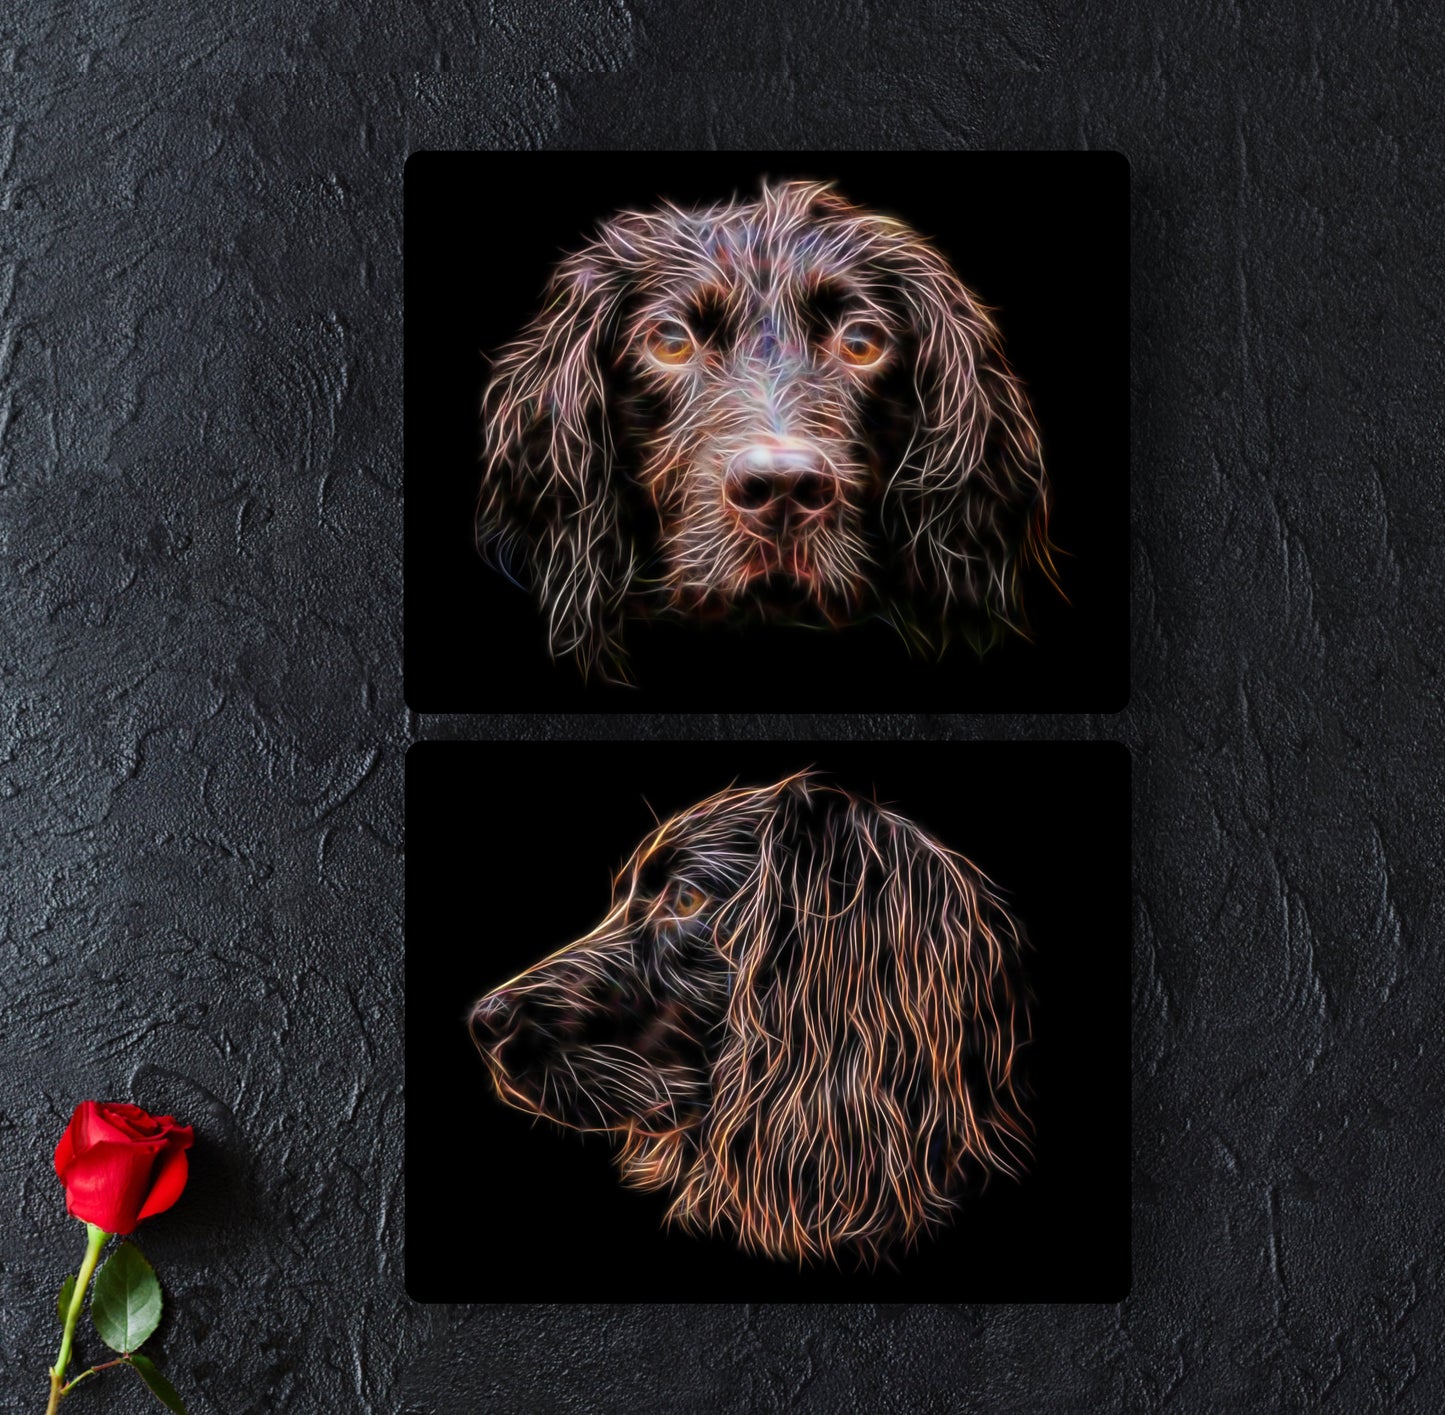 Chocolate Working Cocker Spaniel Metal Wall Plaque  with Stunning Fractal Art Design